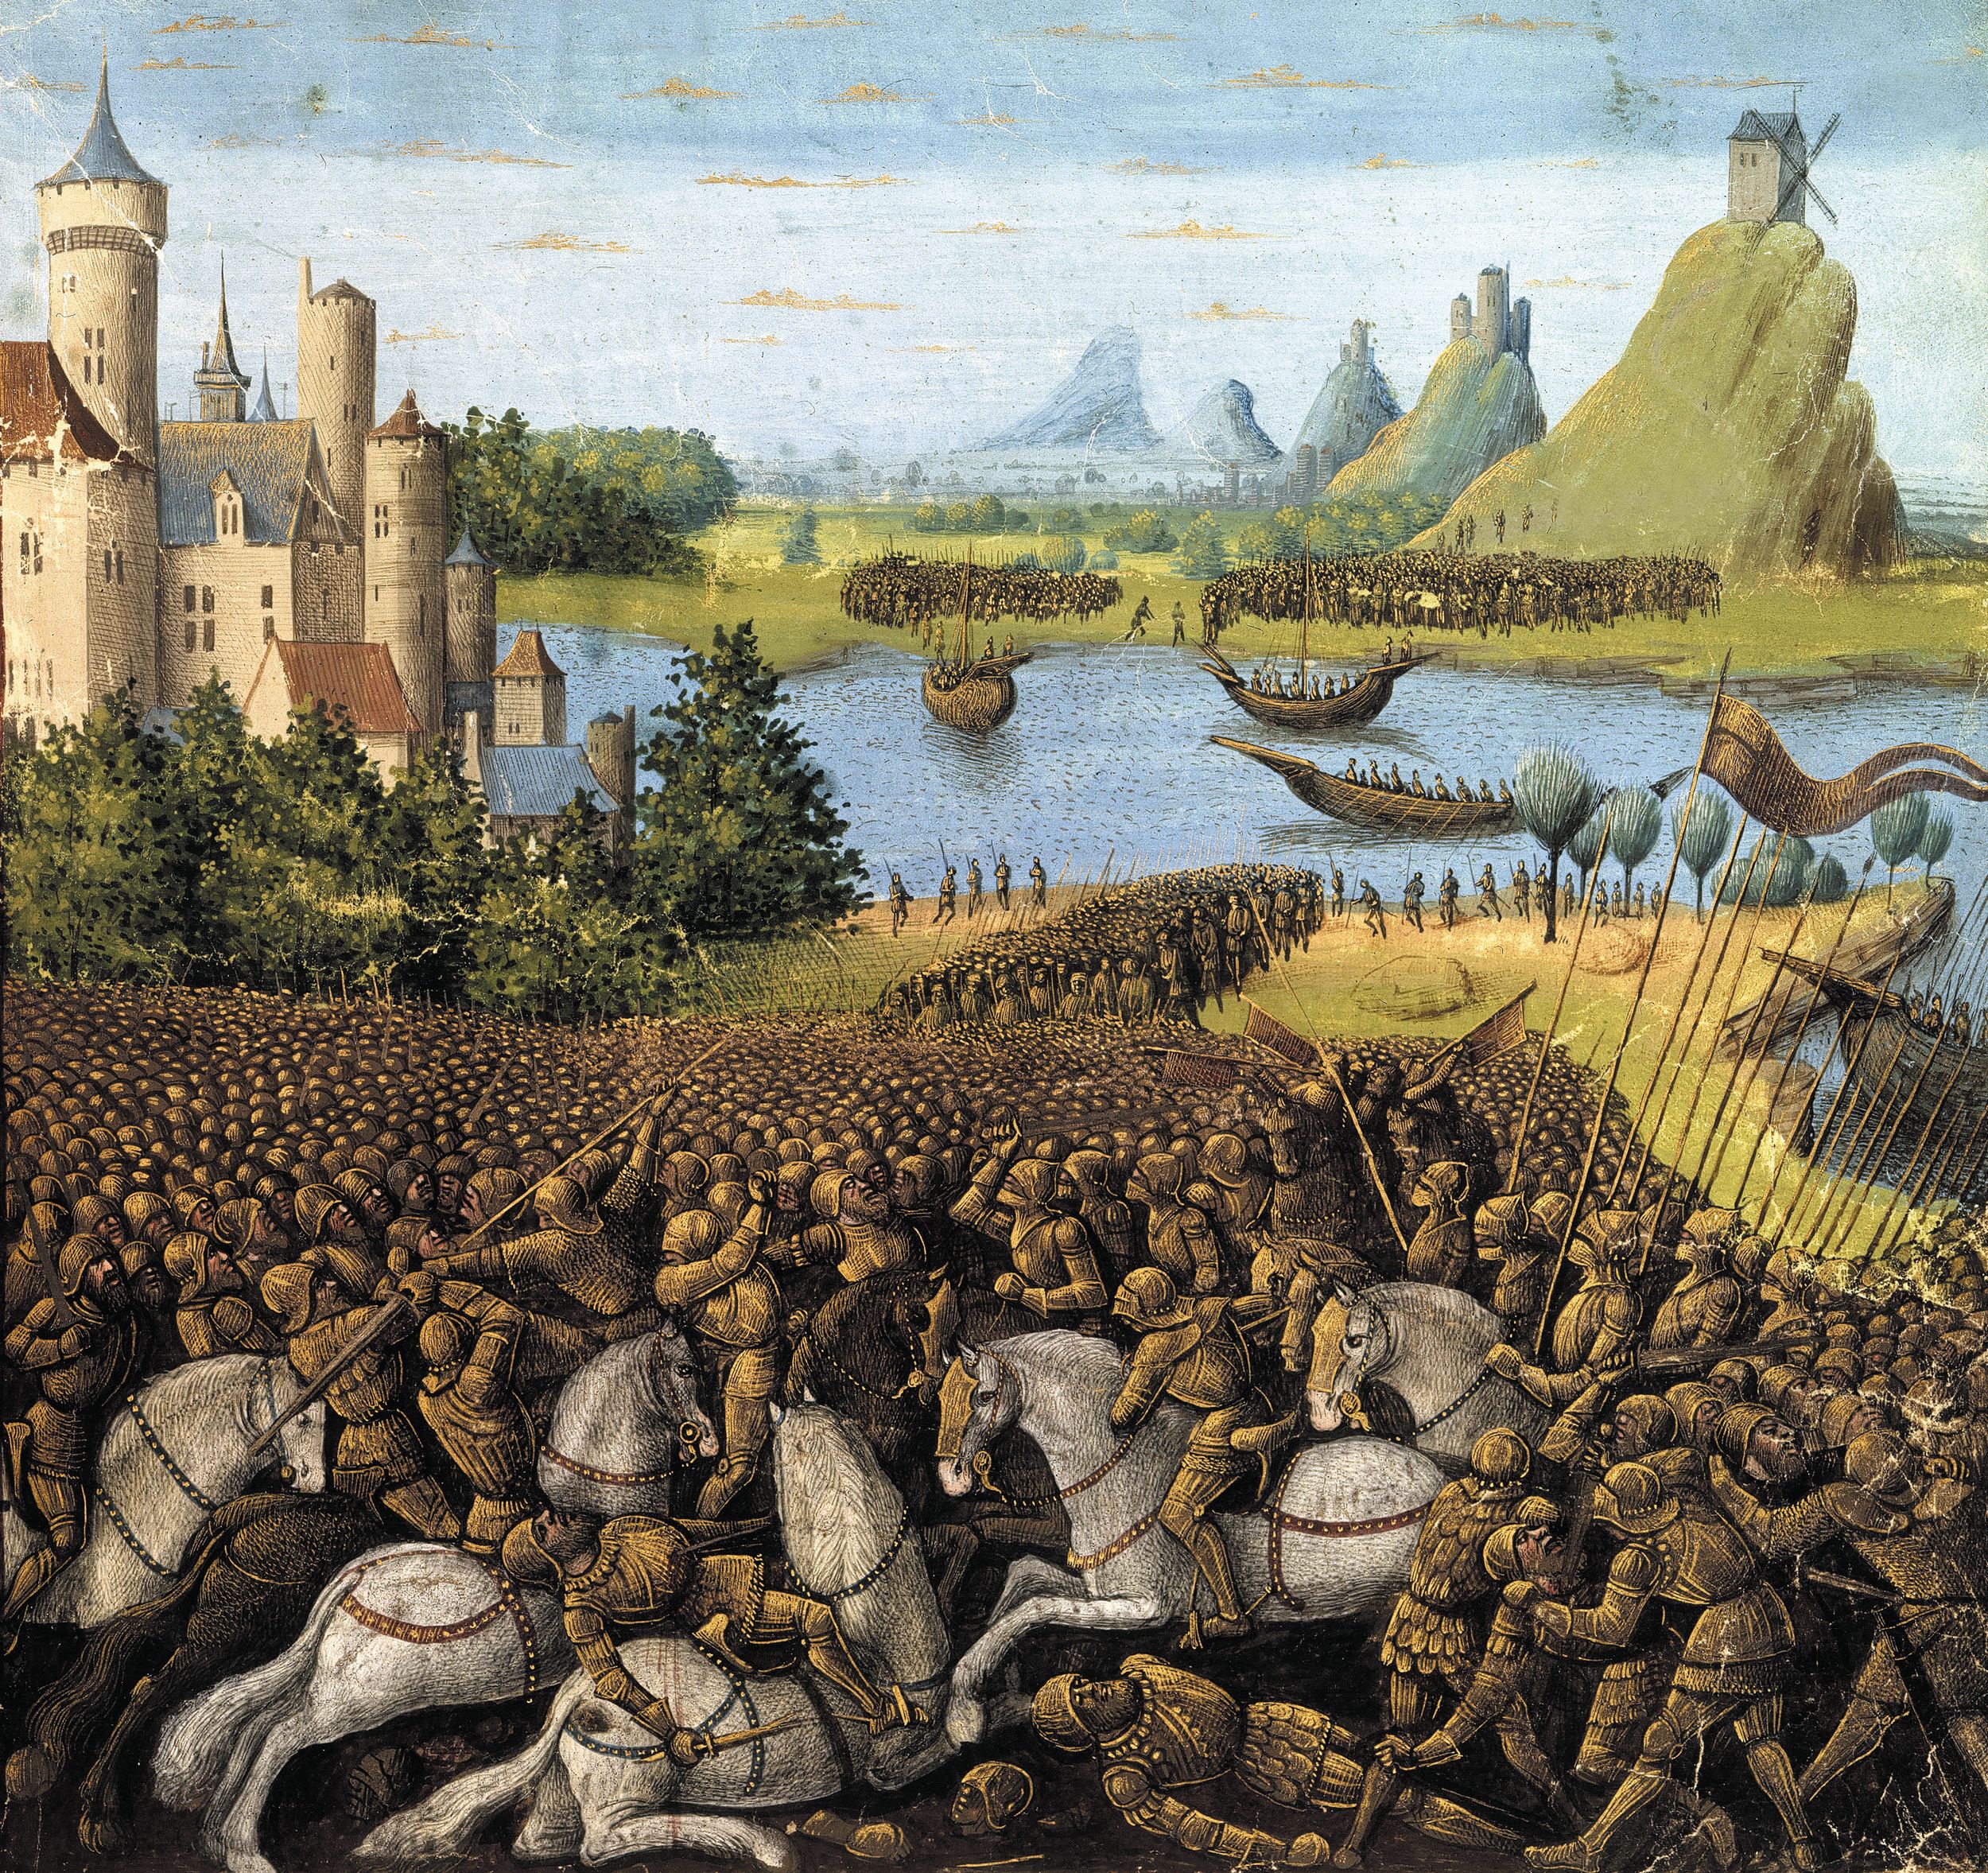 Bohemond of Taranto, an Italian prince, answered Pope Urban’s call and became one of the leaders of the First Crusade. Here his army is attacked by the Turks as it crosses the Wardar River early in the crusade.